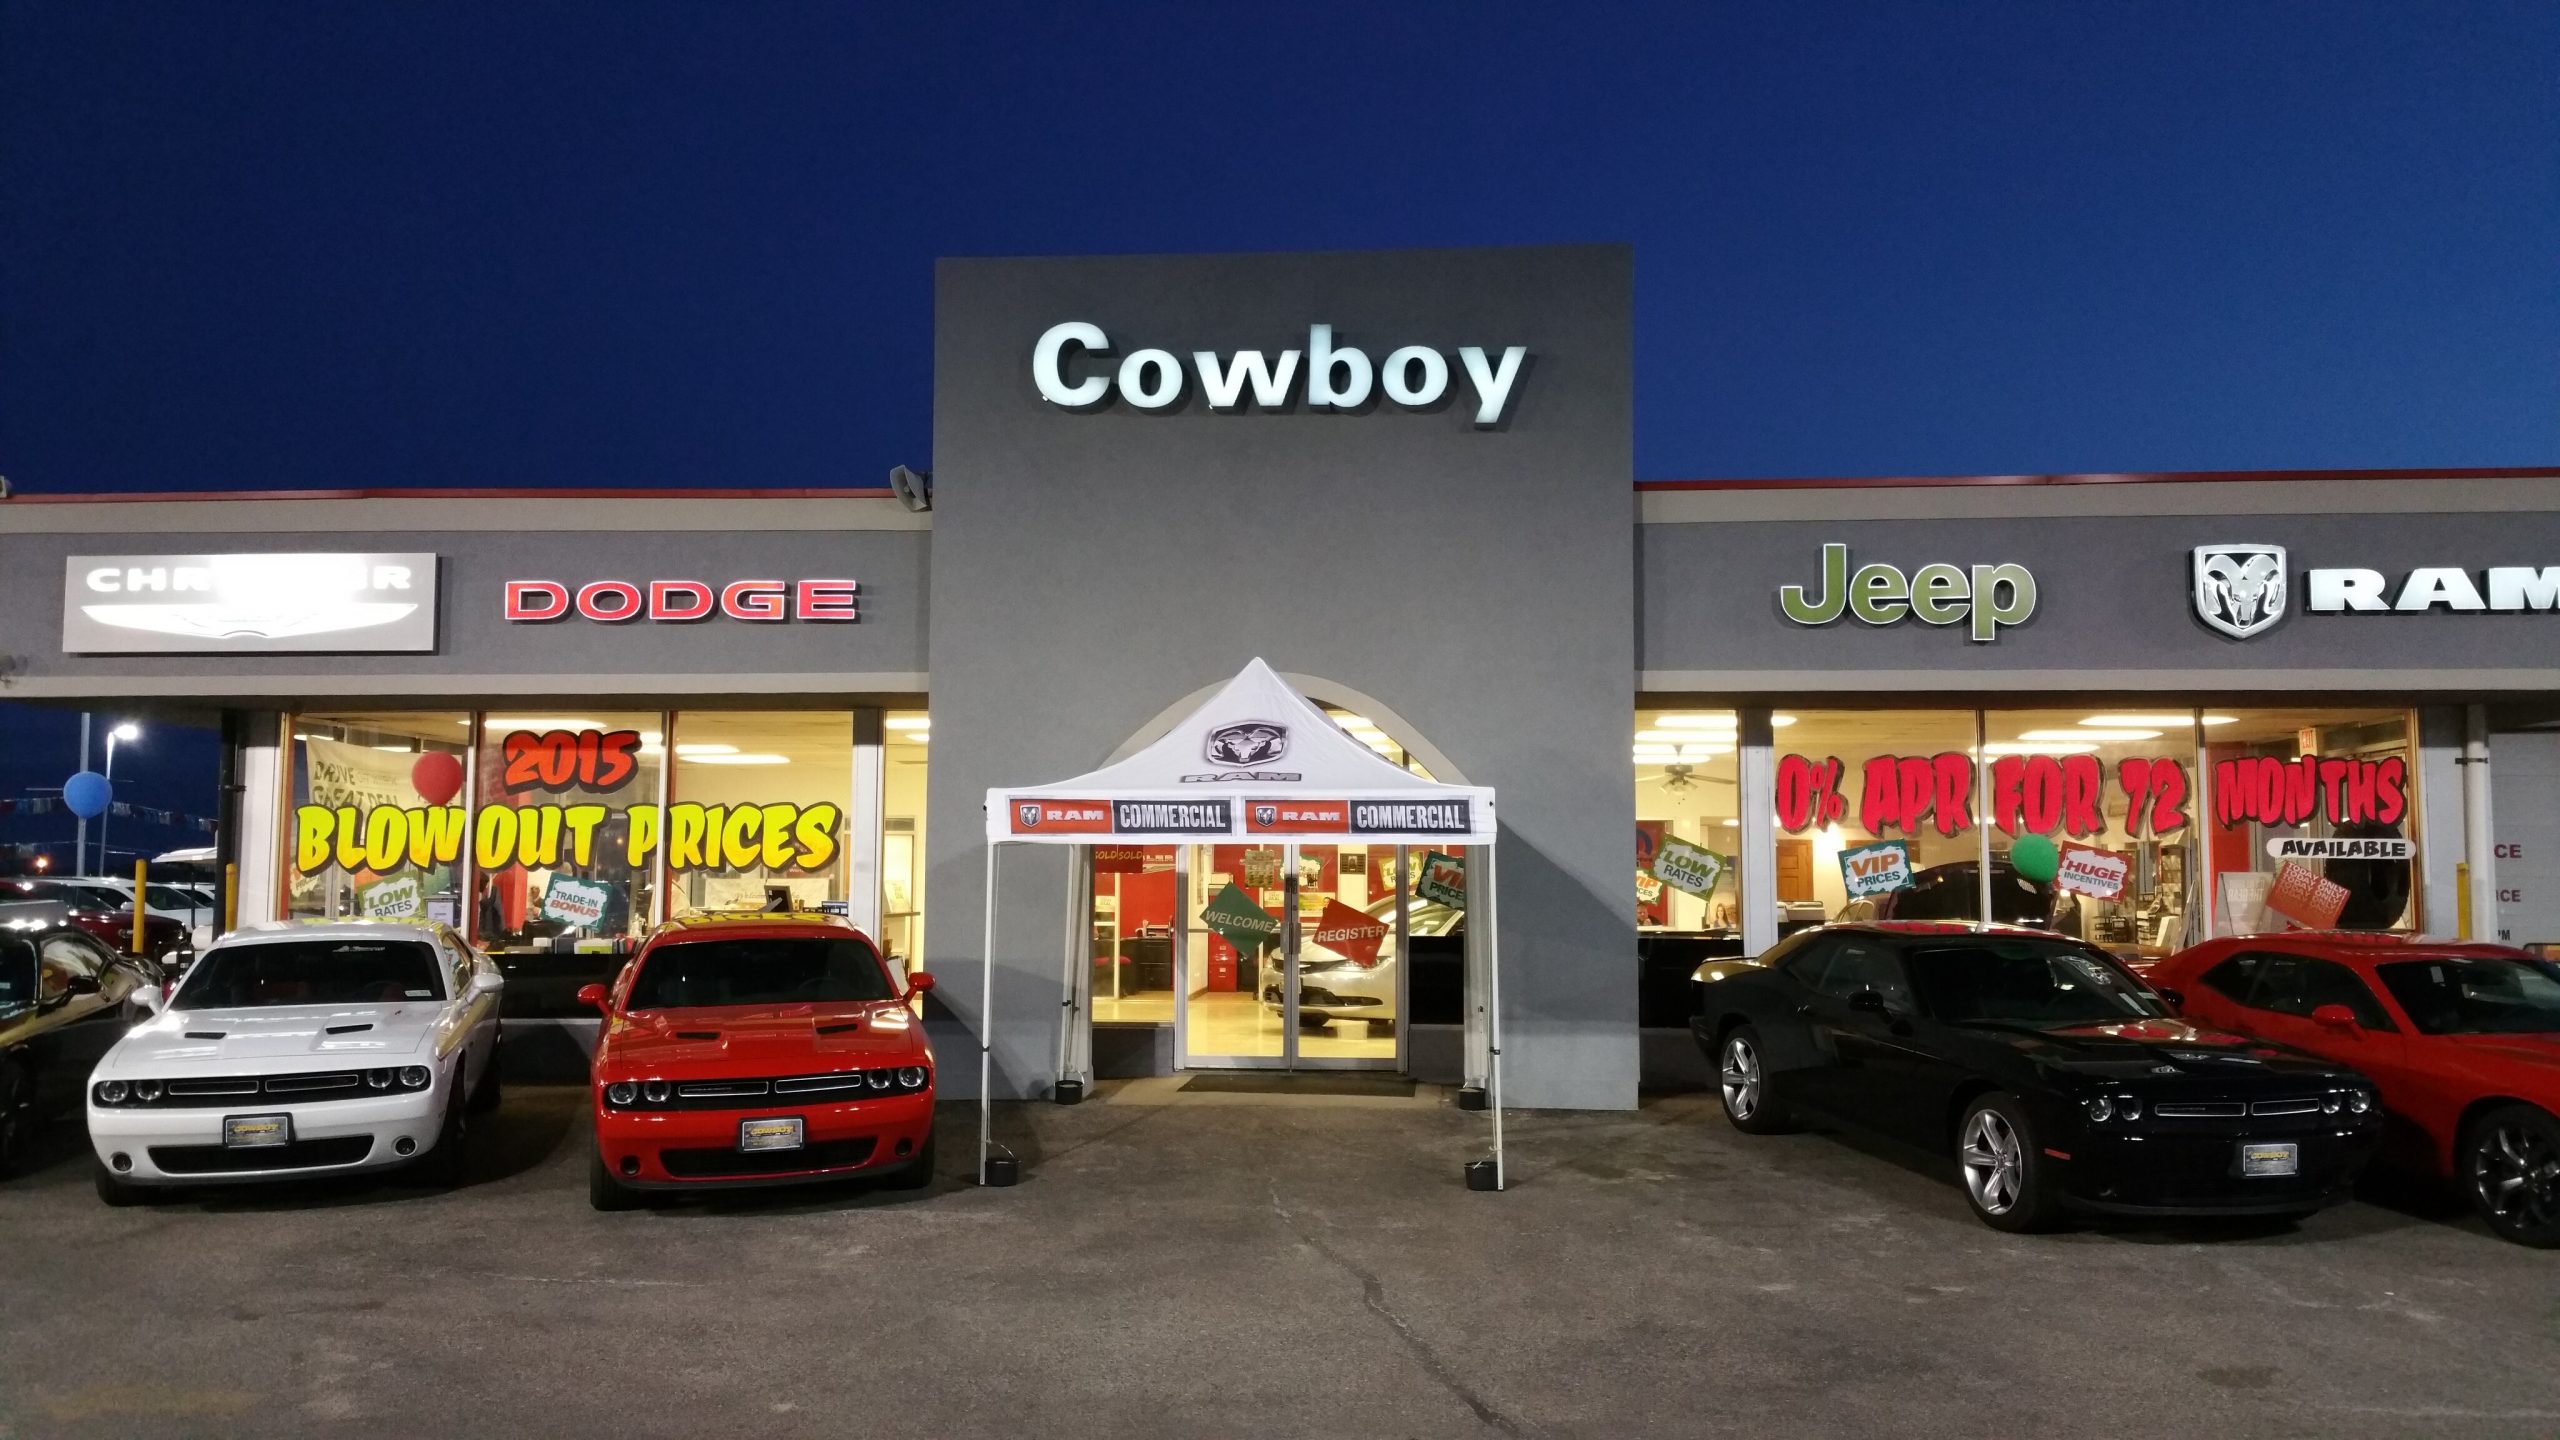 About Cowboy Dodge | New Ram, Jeep, Dodge, Chrysler And concernant Used Dodge Dealership Boone